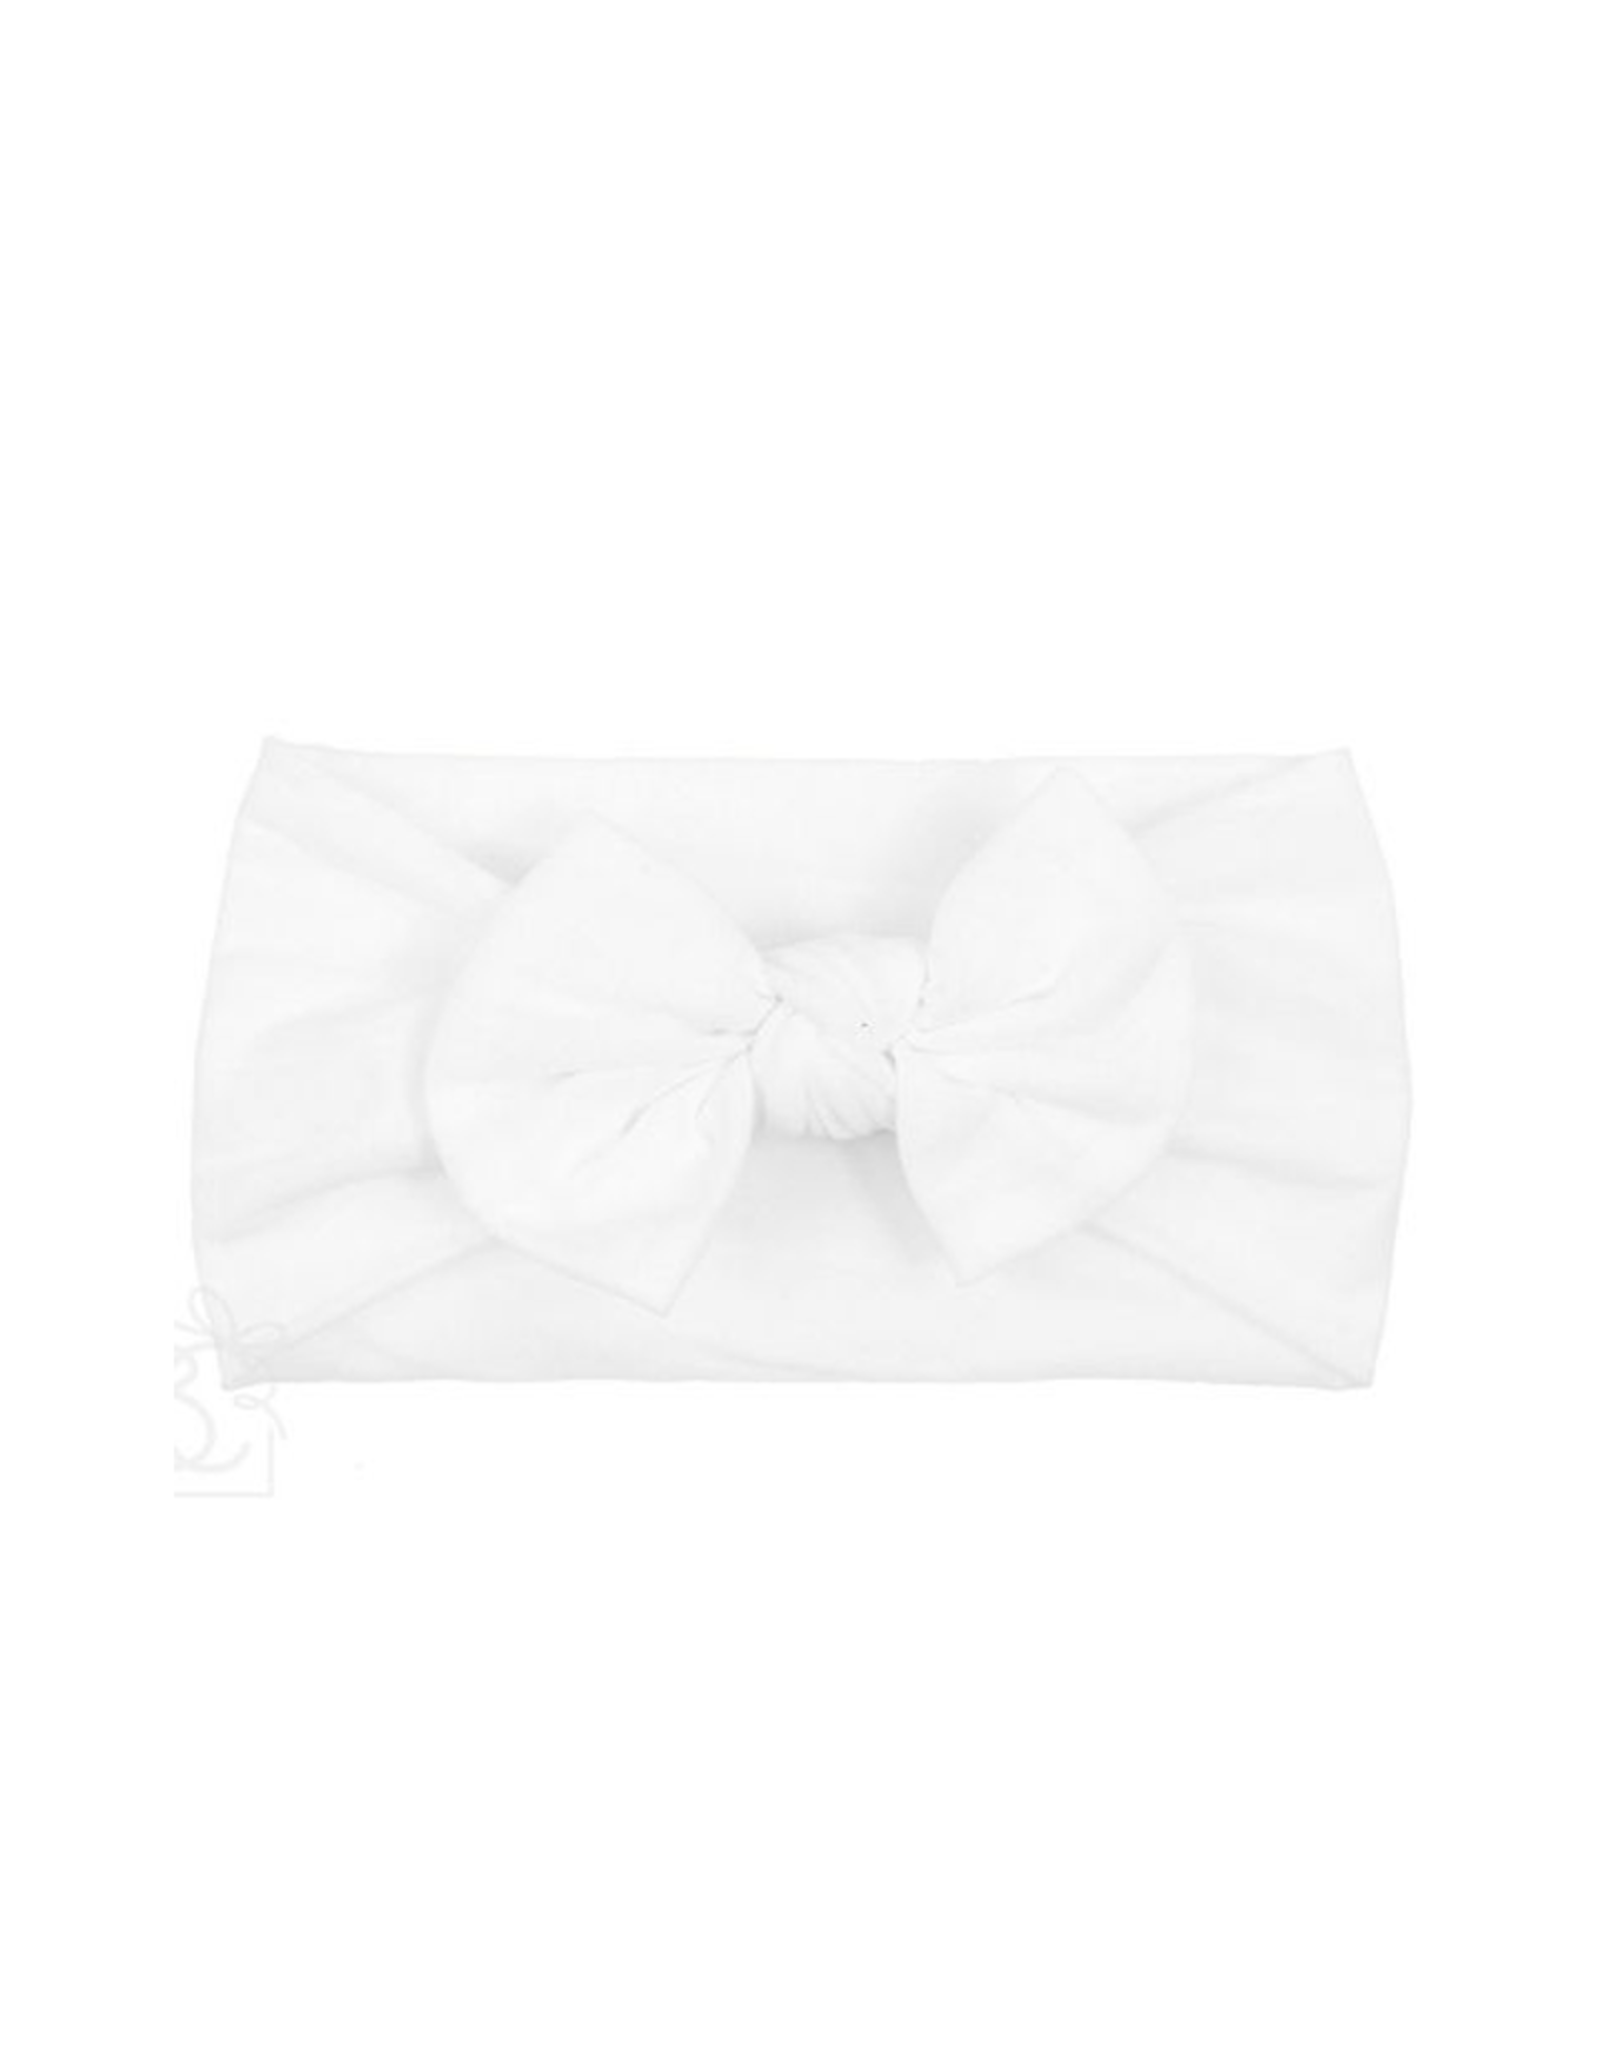 Beyond Creations PAKNOT Headband with Knot Bow